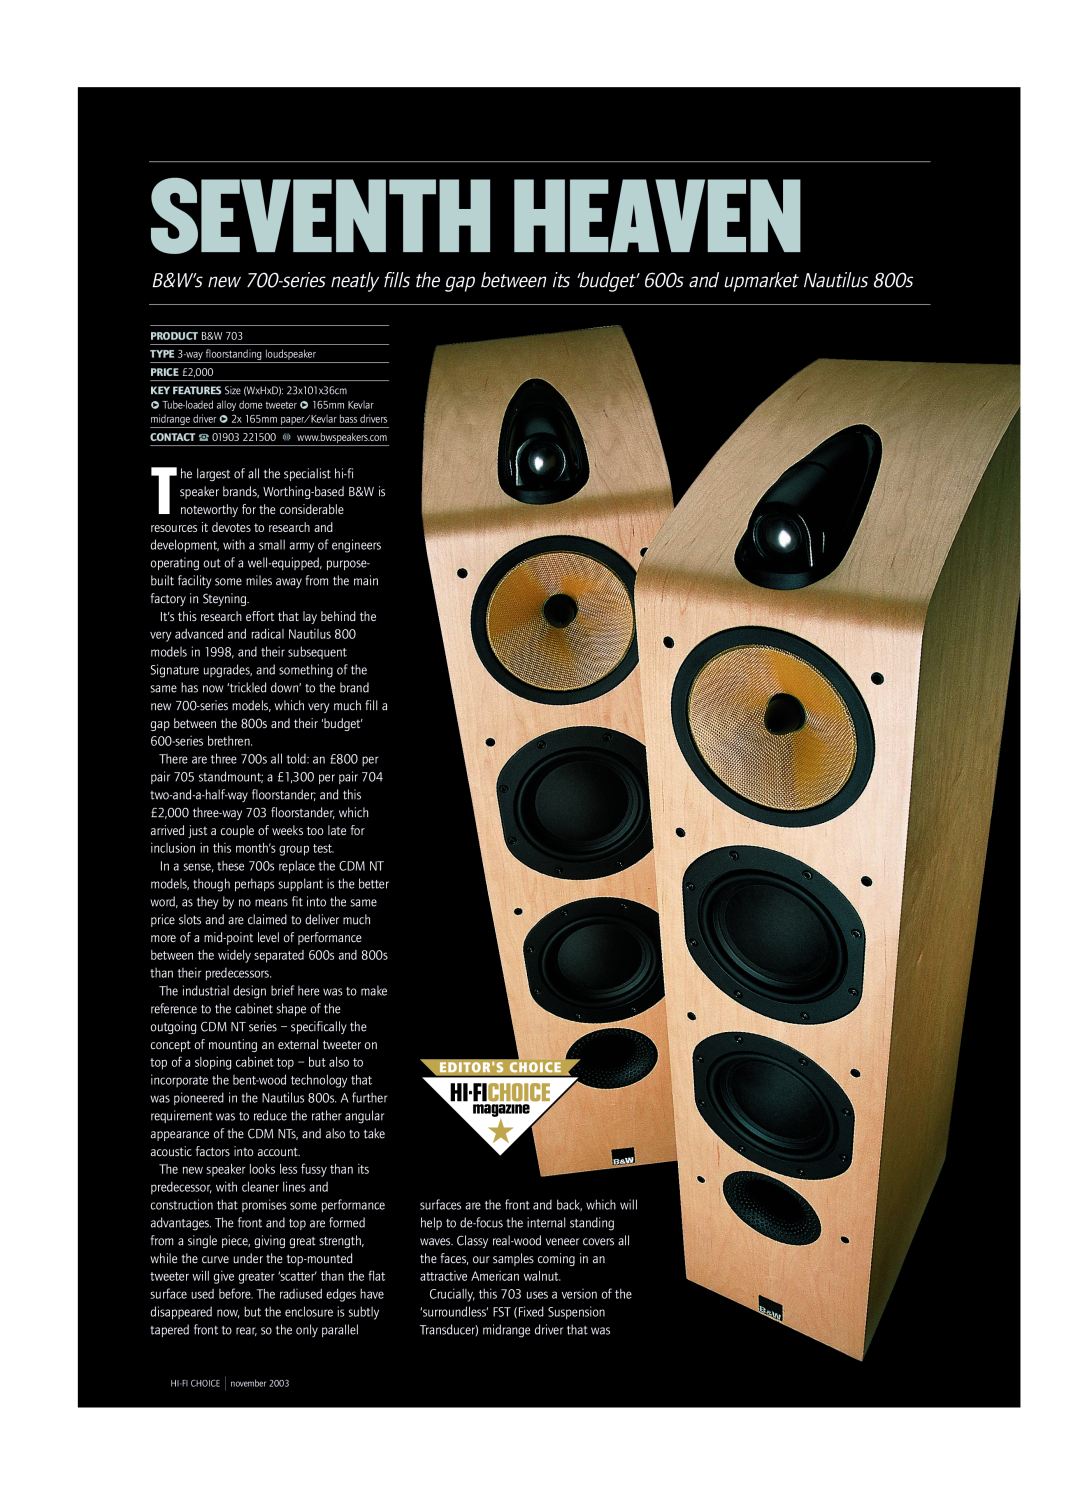 Bowers & Wilkins 700 manual Seventh Heaven, Product B&W, PRICE £2,000 